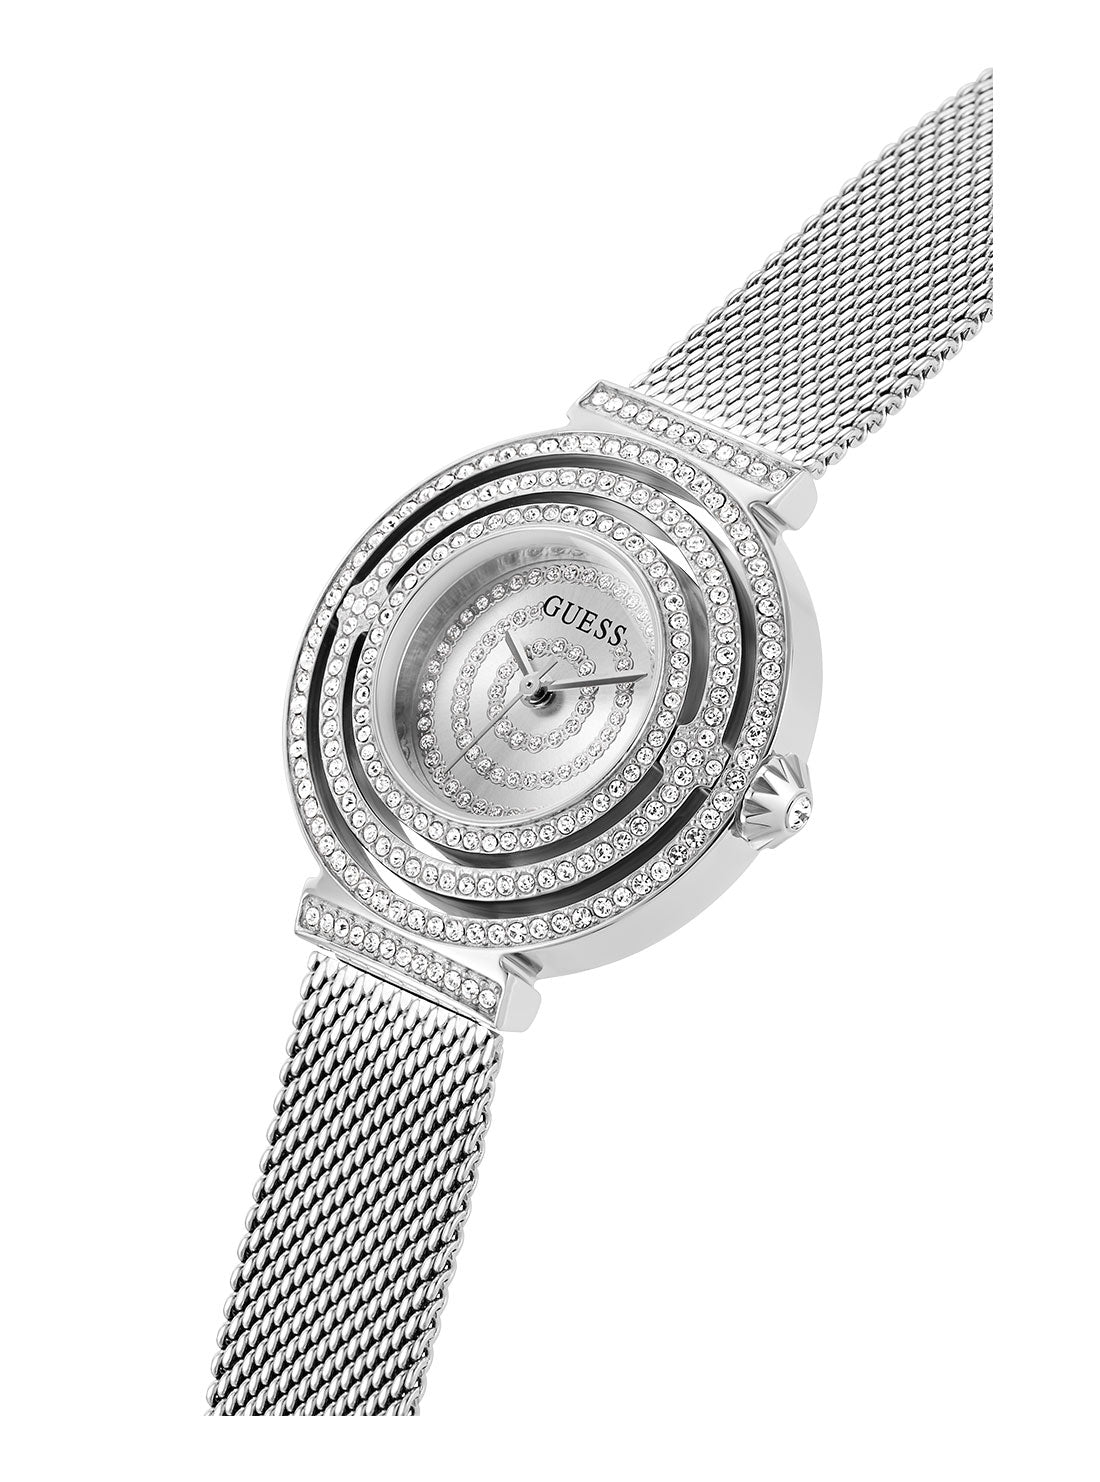 GUESS Women's Silver Dream Crystal Mesh Watch GW0550L1 Angle View